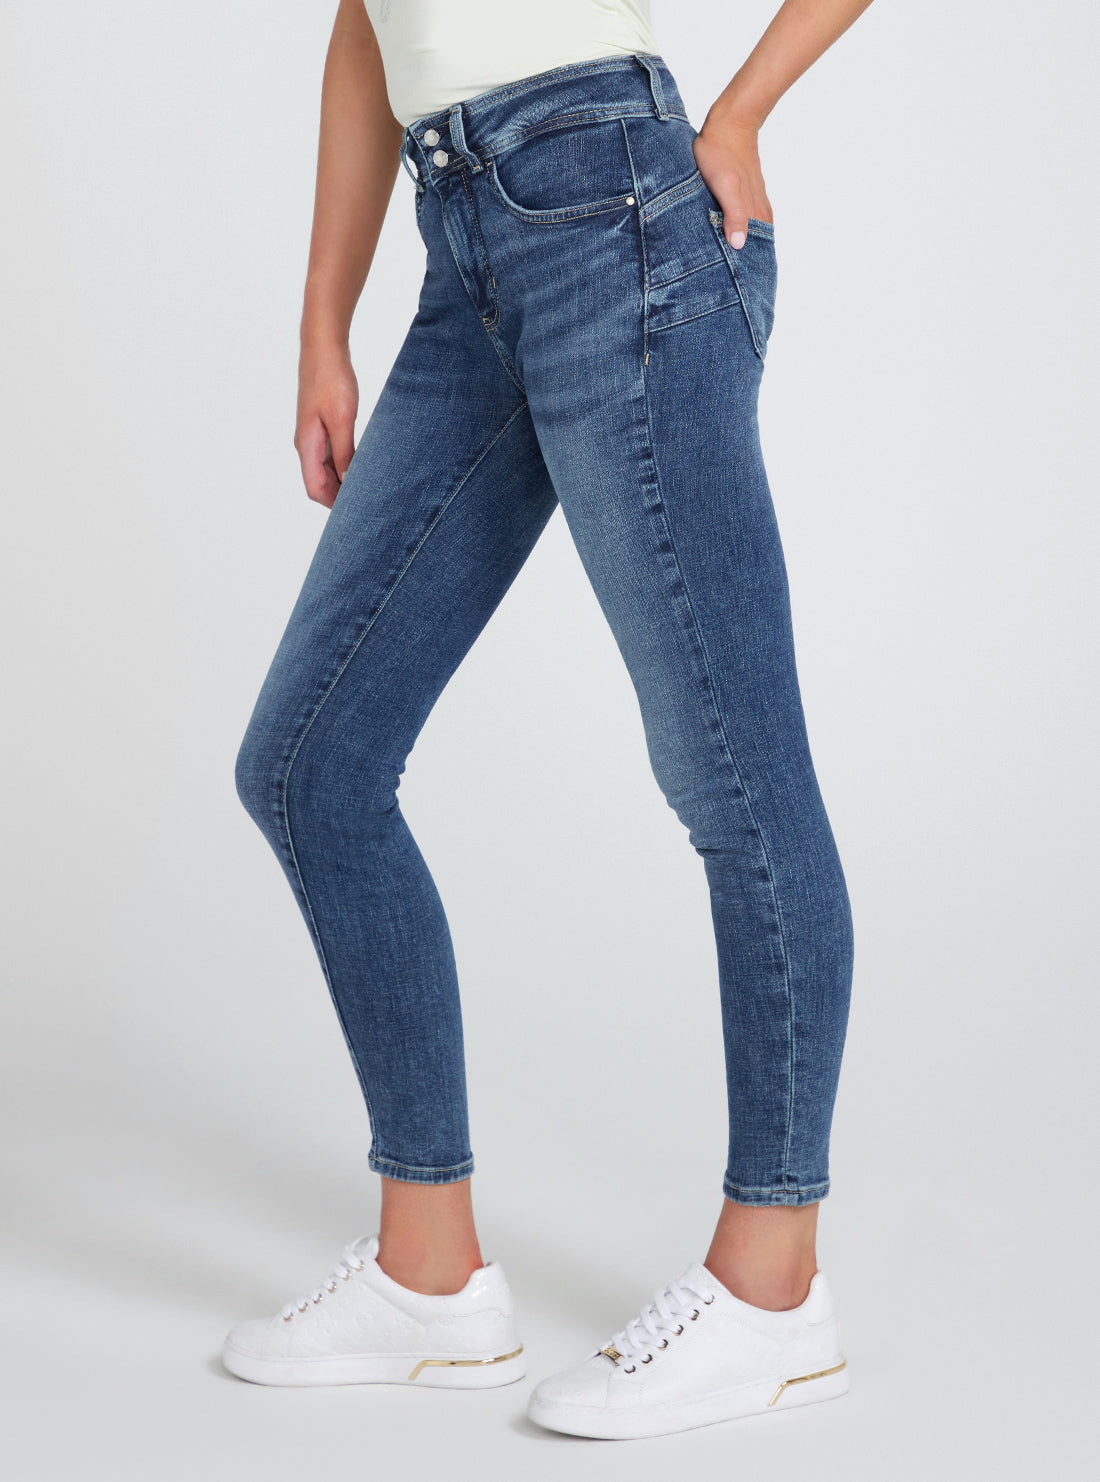 Mid-Rise Shape Up Denim Jeans in Biosphere Wash